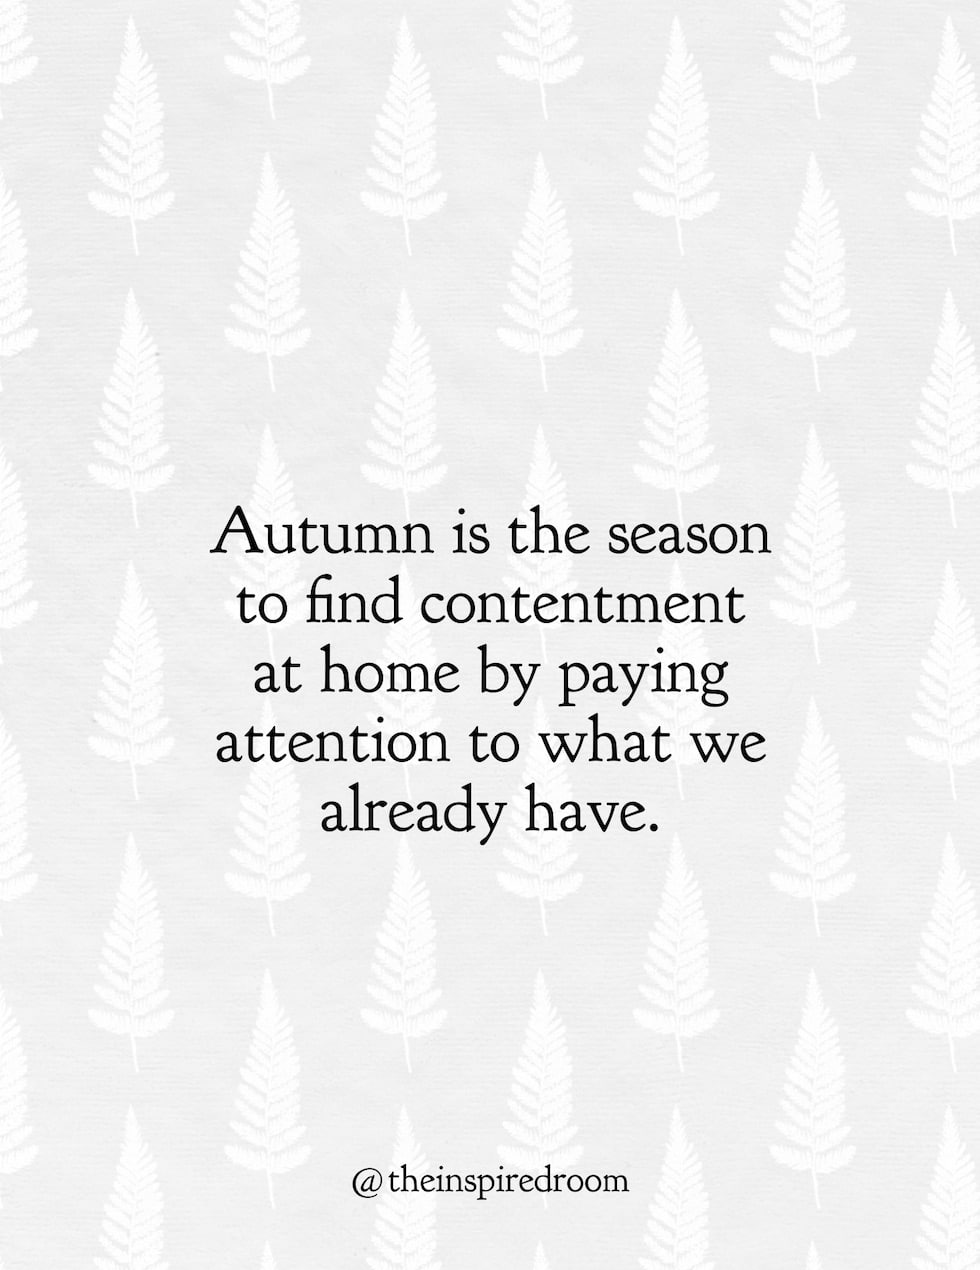 How to Create an Autumn Mindset for Our Home (and why social media bothers us)